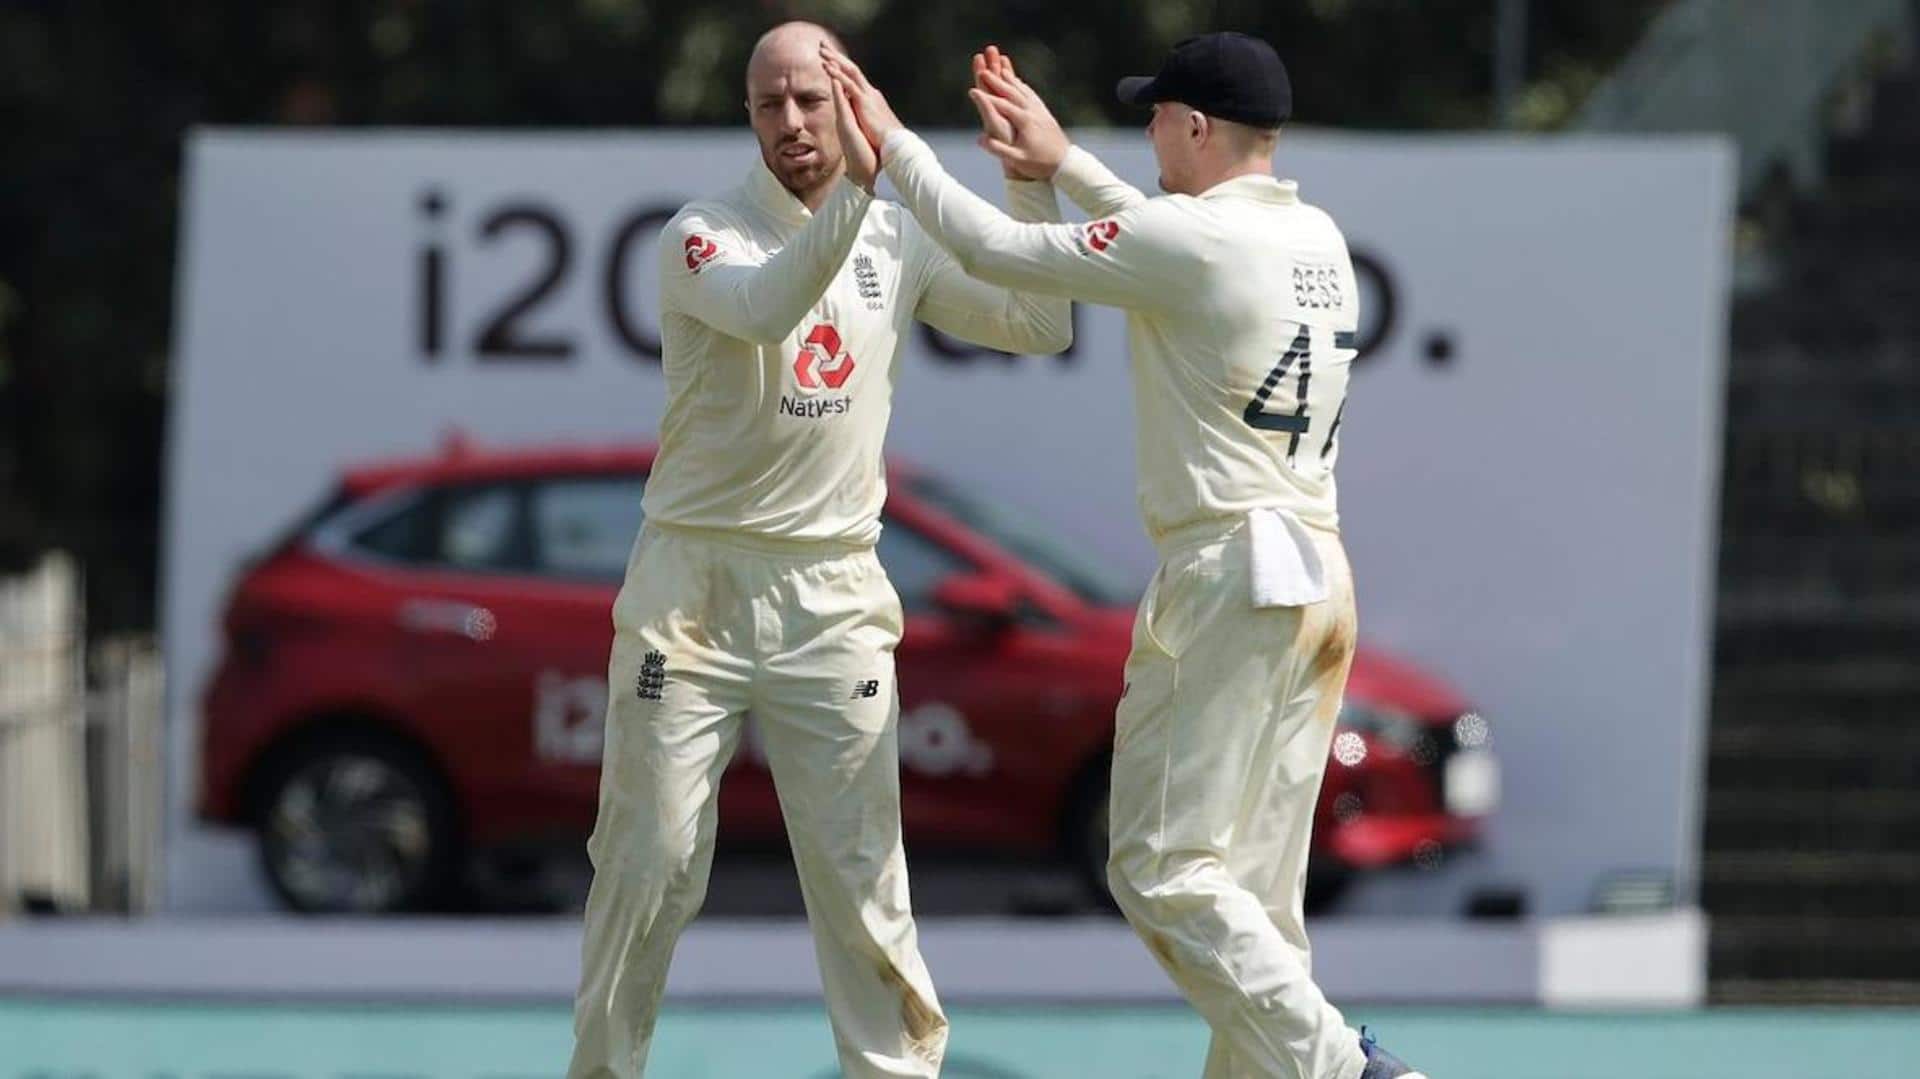 PAK vs ENG, Jack Leach completes 100 Test wickets: Stats